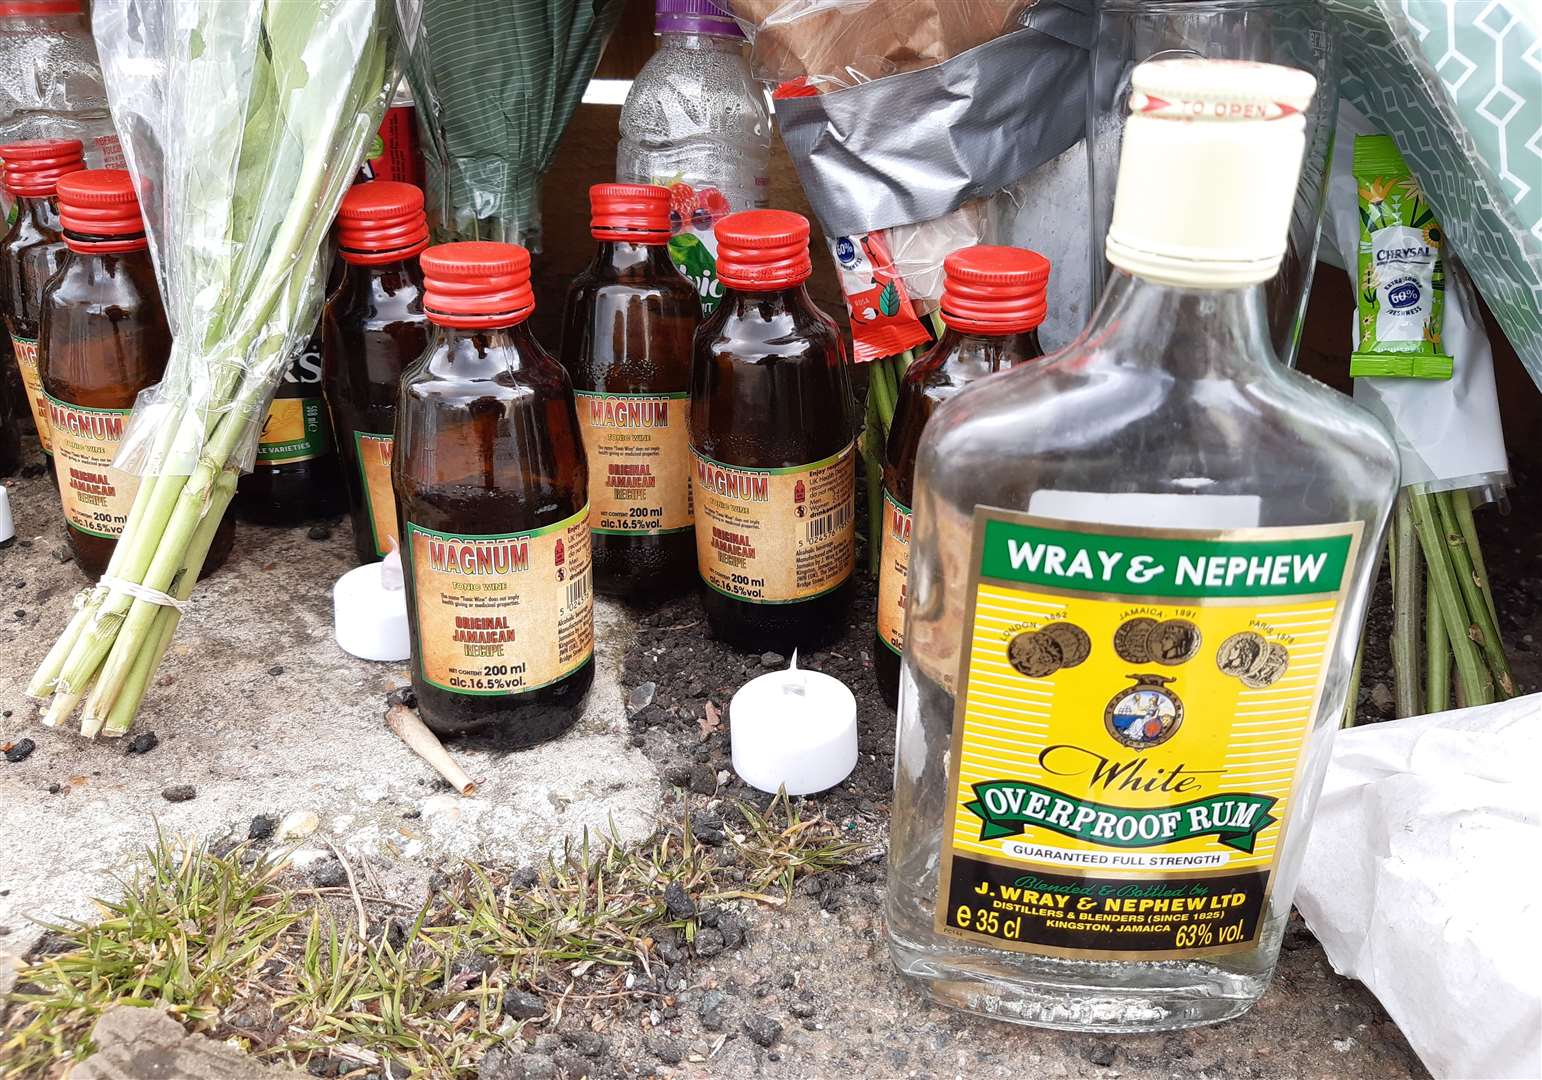 Bottles of rum and tonic wine were left in Hunter Road last month